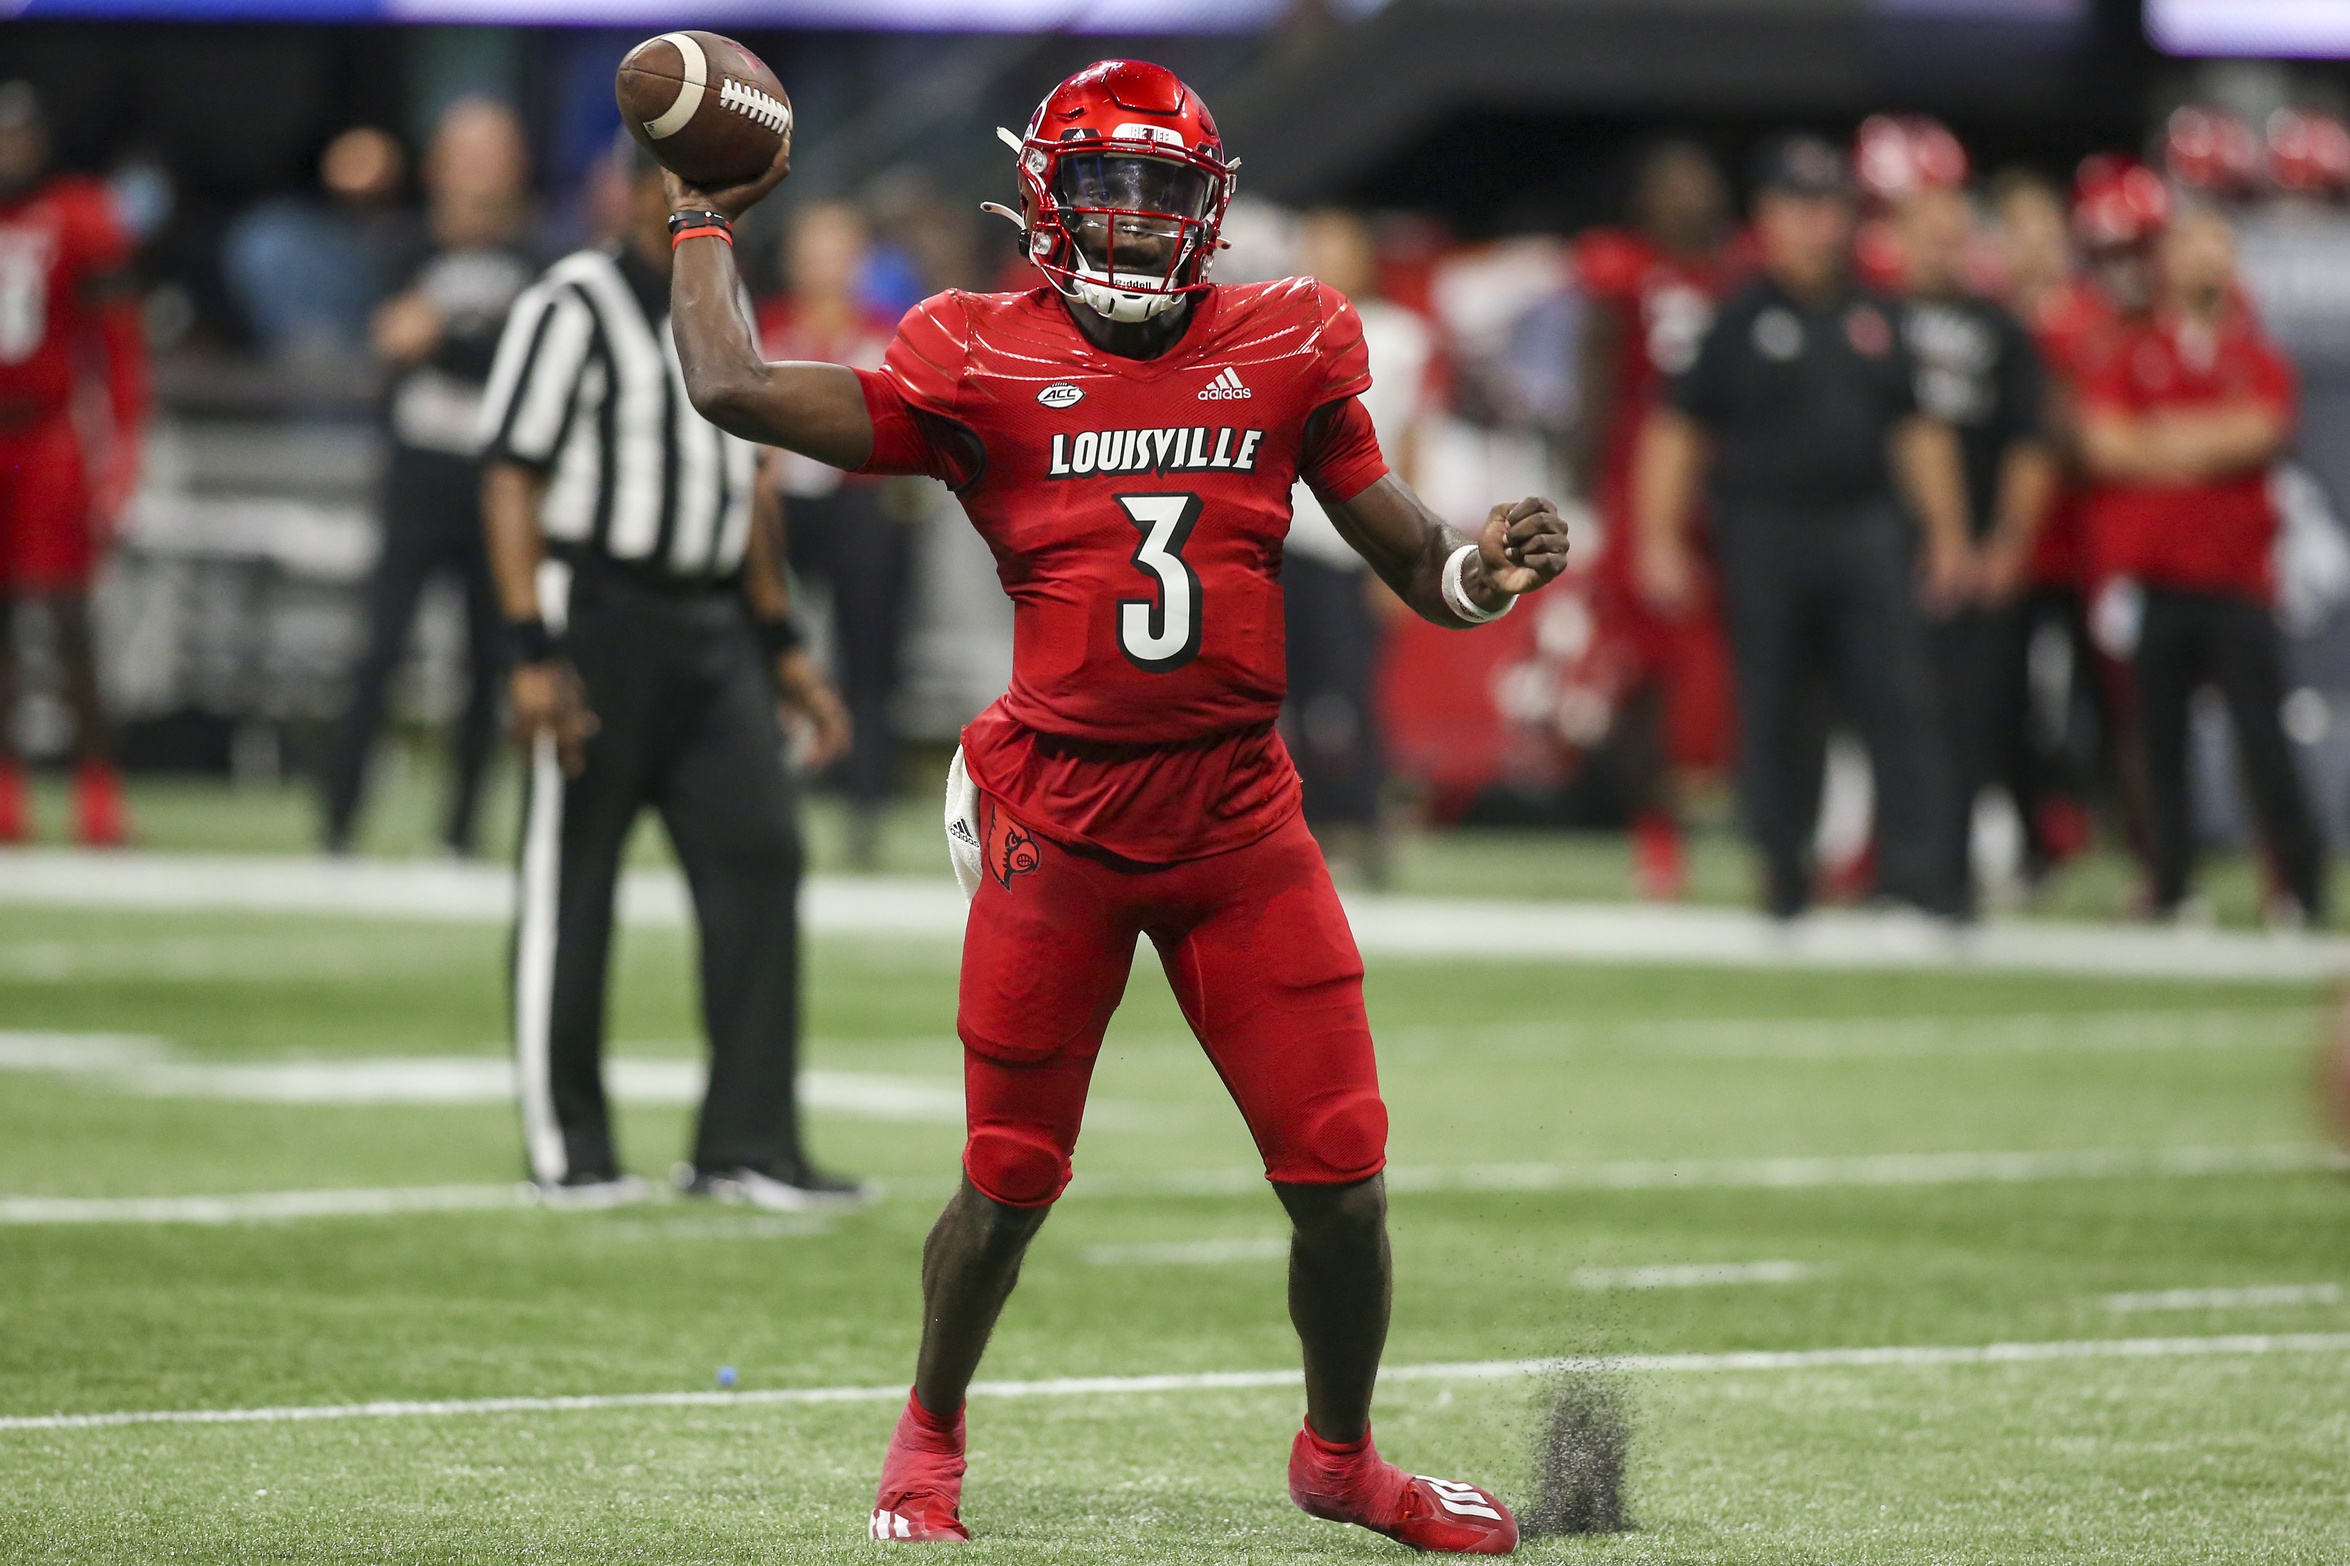 UCF Knights vs Louisville Cardinals Prediction, 9/17/2021 College